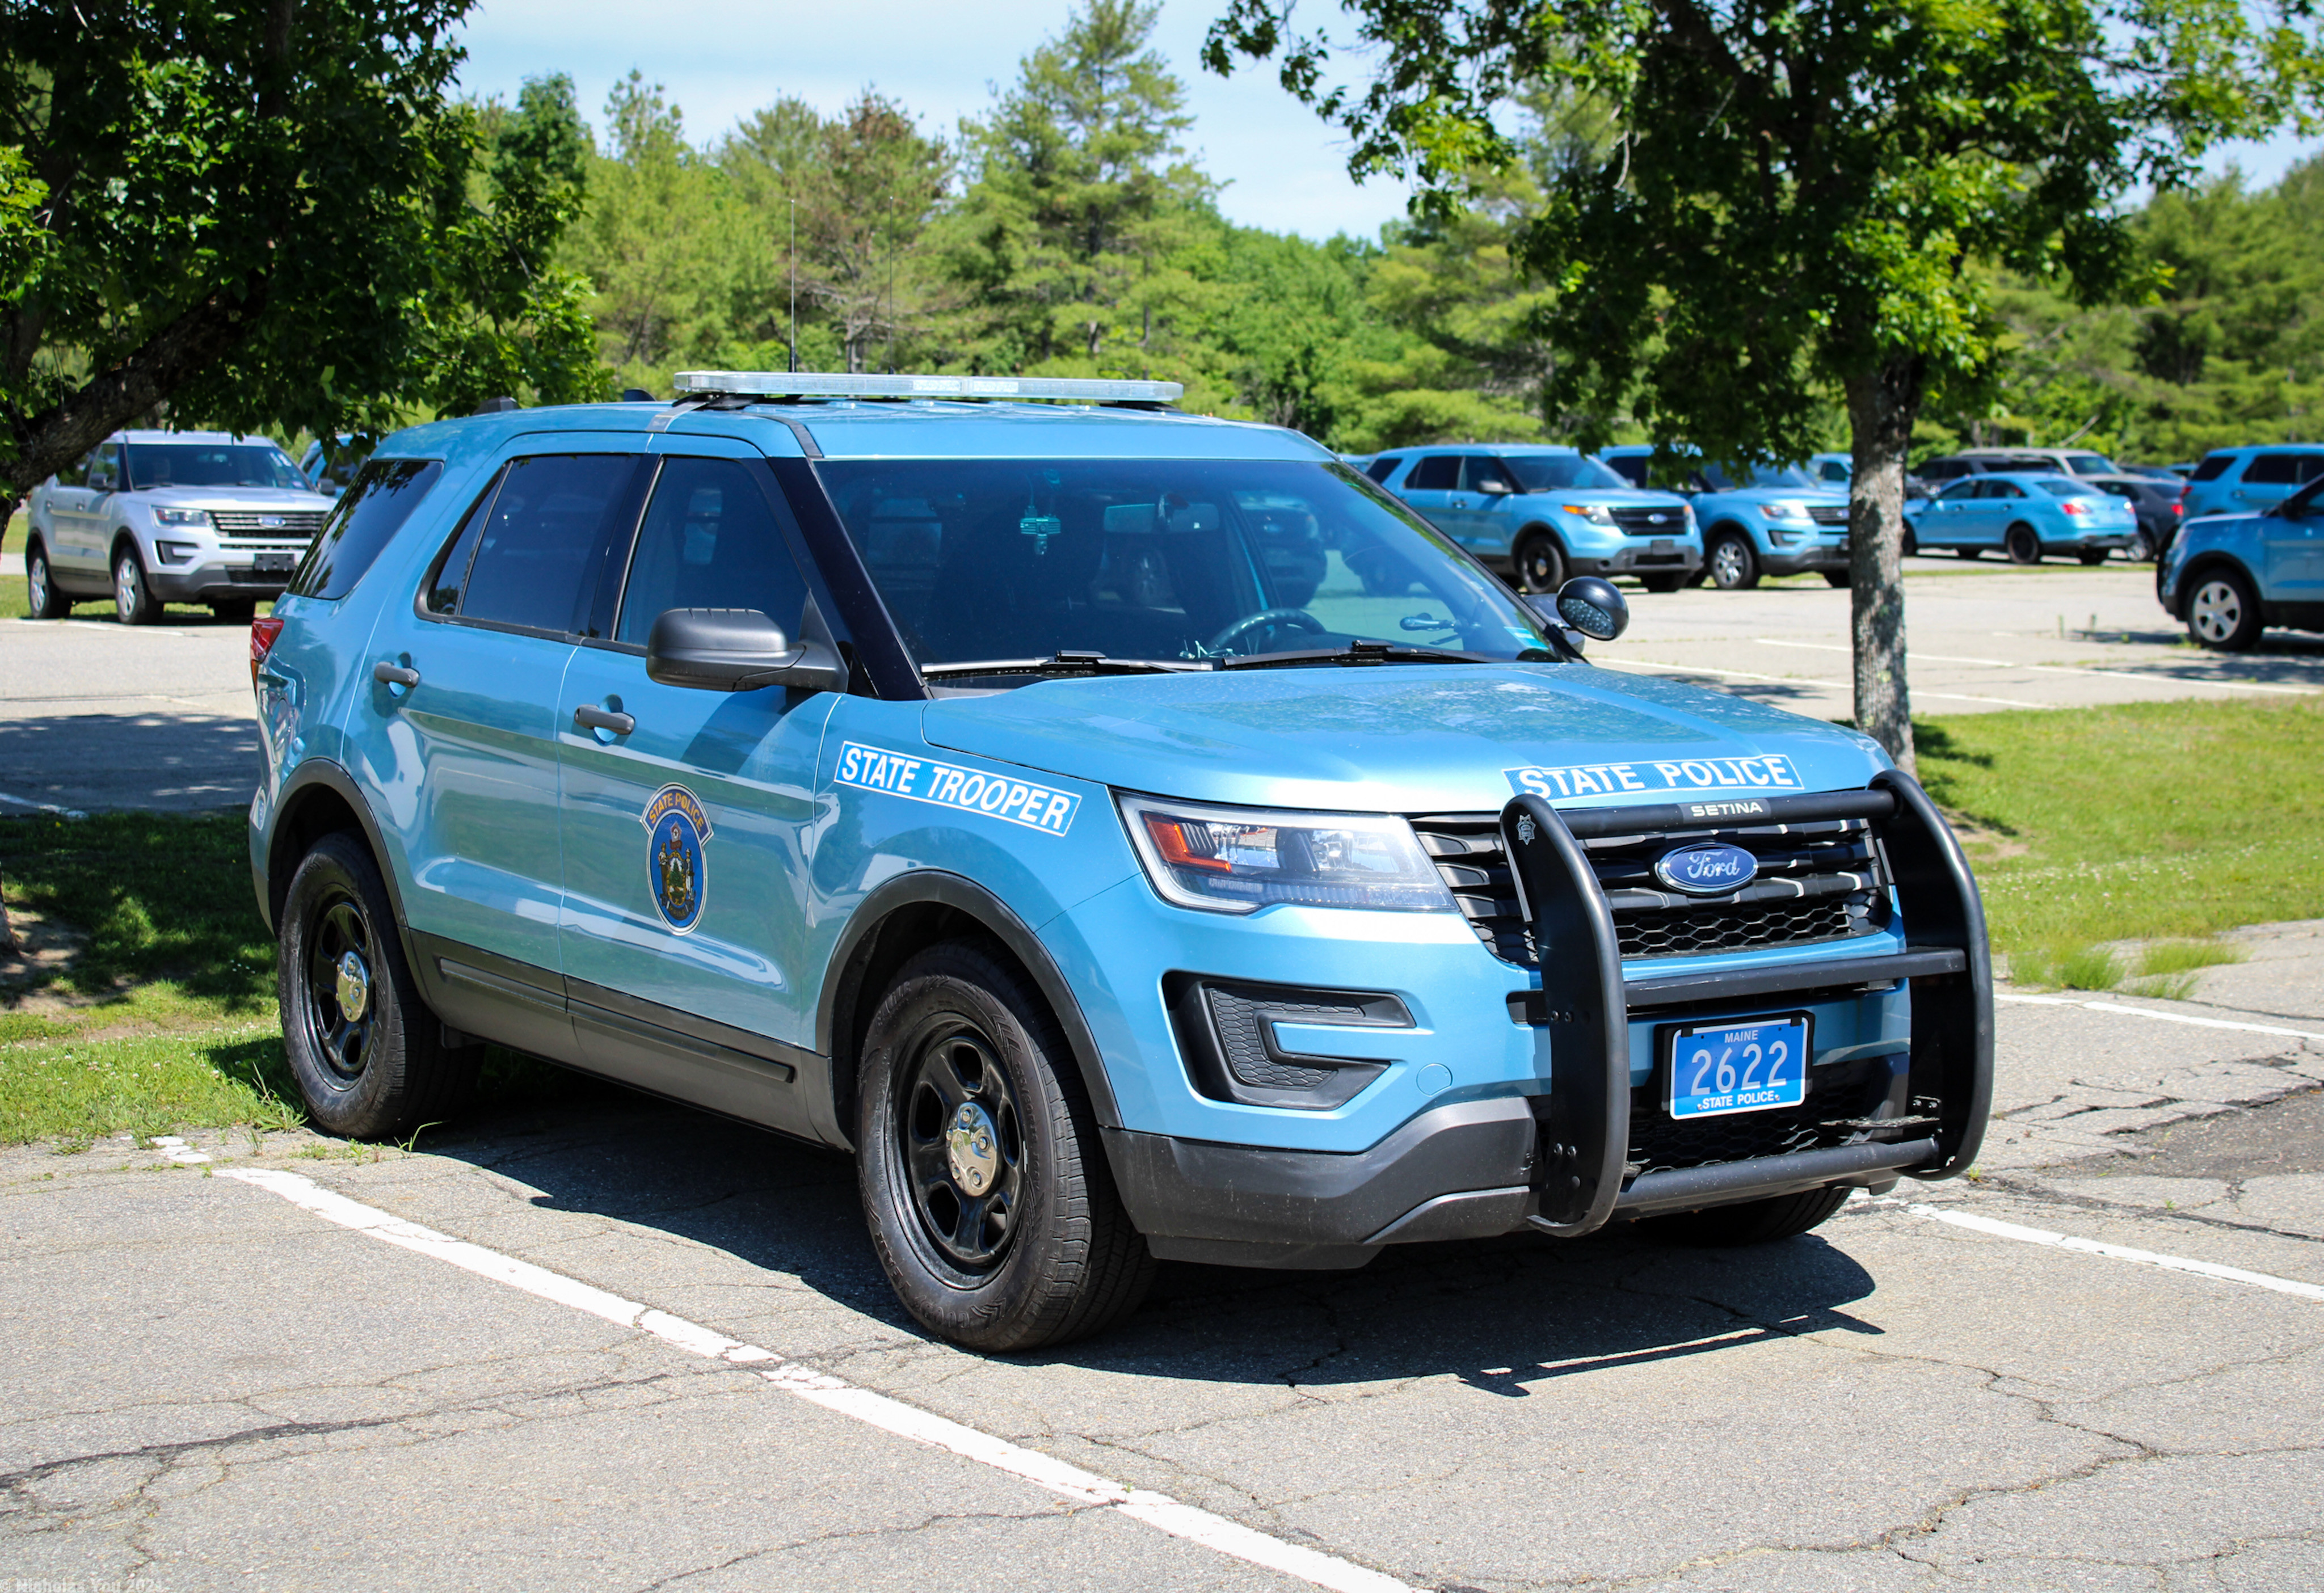 A photo  of Maine State Police
            Cruiser 2622, a 2016-2019 Ford Police Interceptor Utility             taken by Nicholas You